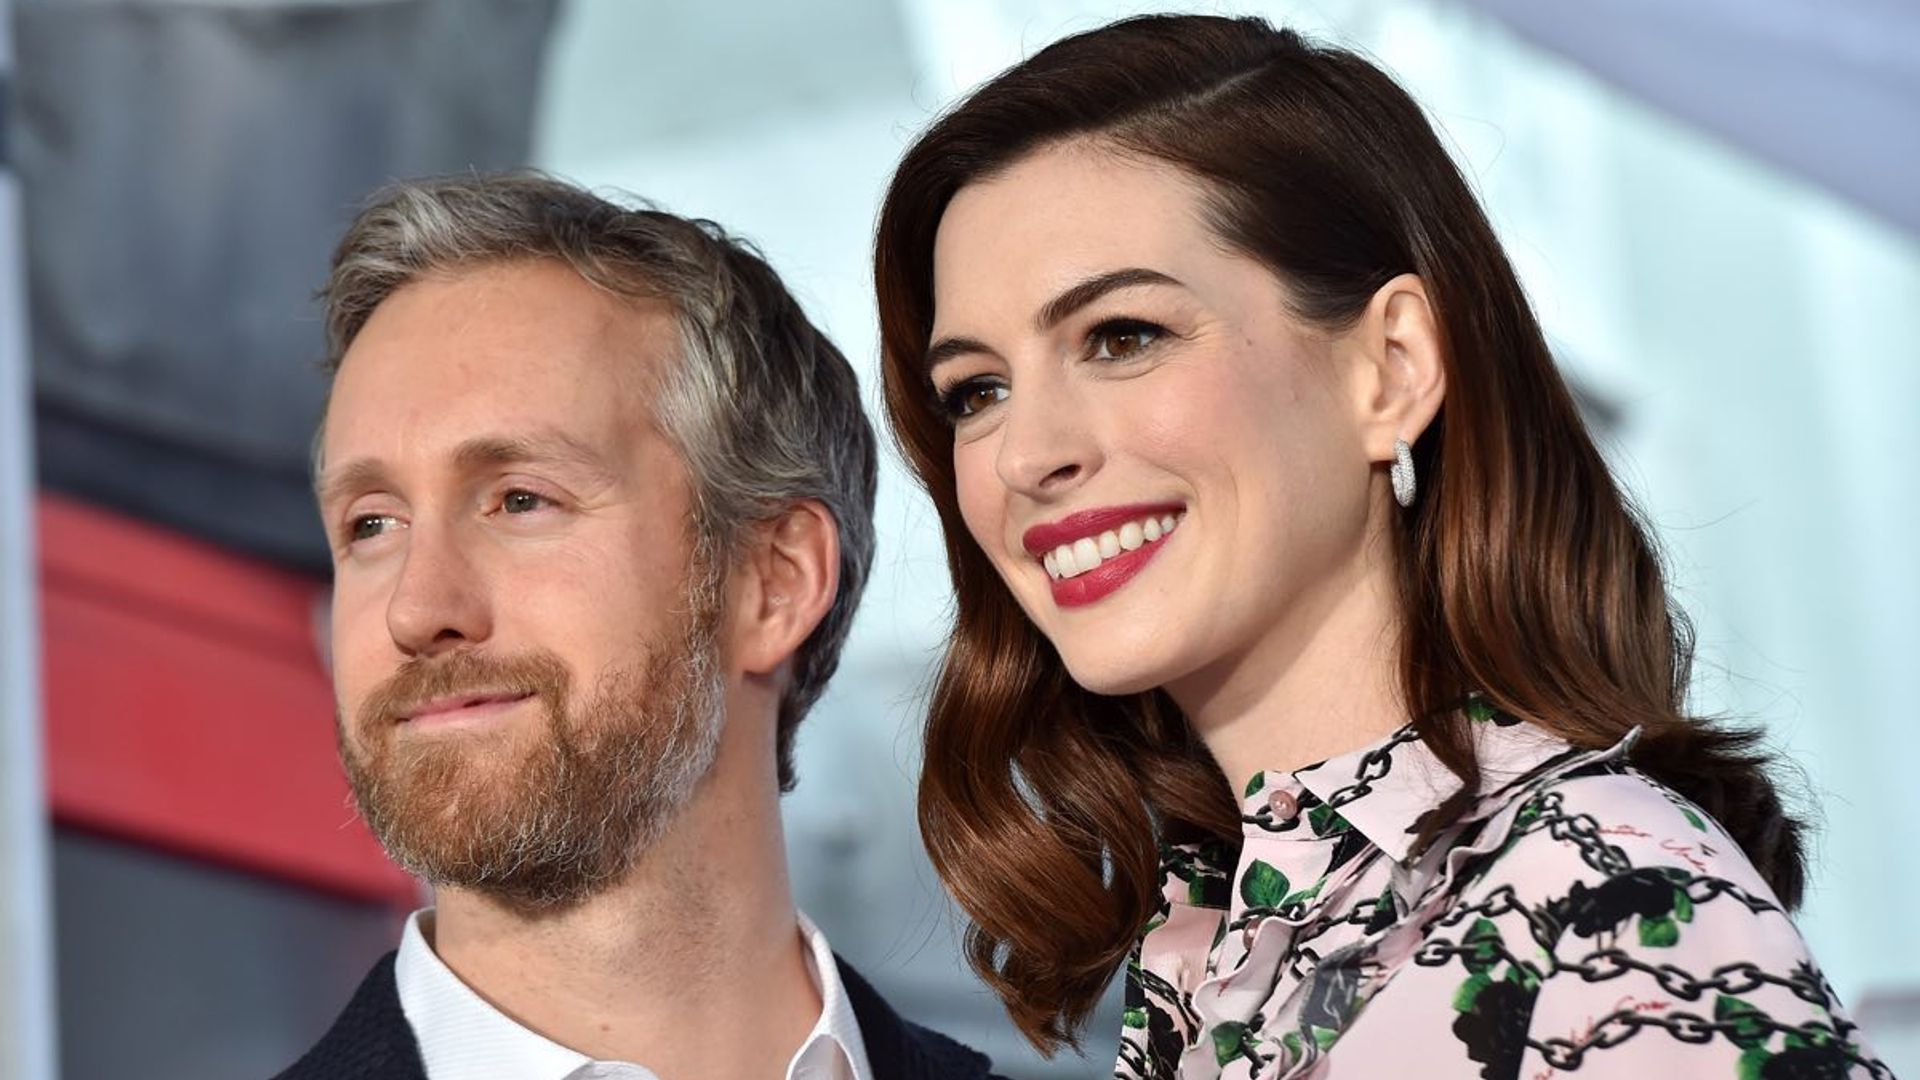 Anne Hathaway opens up about her infertility hell in candid interview